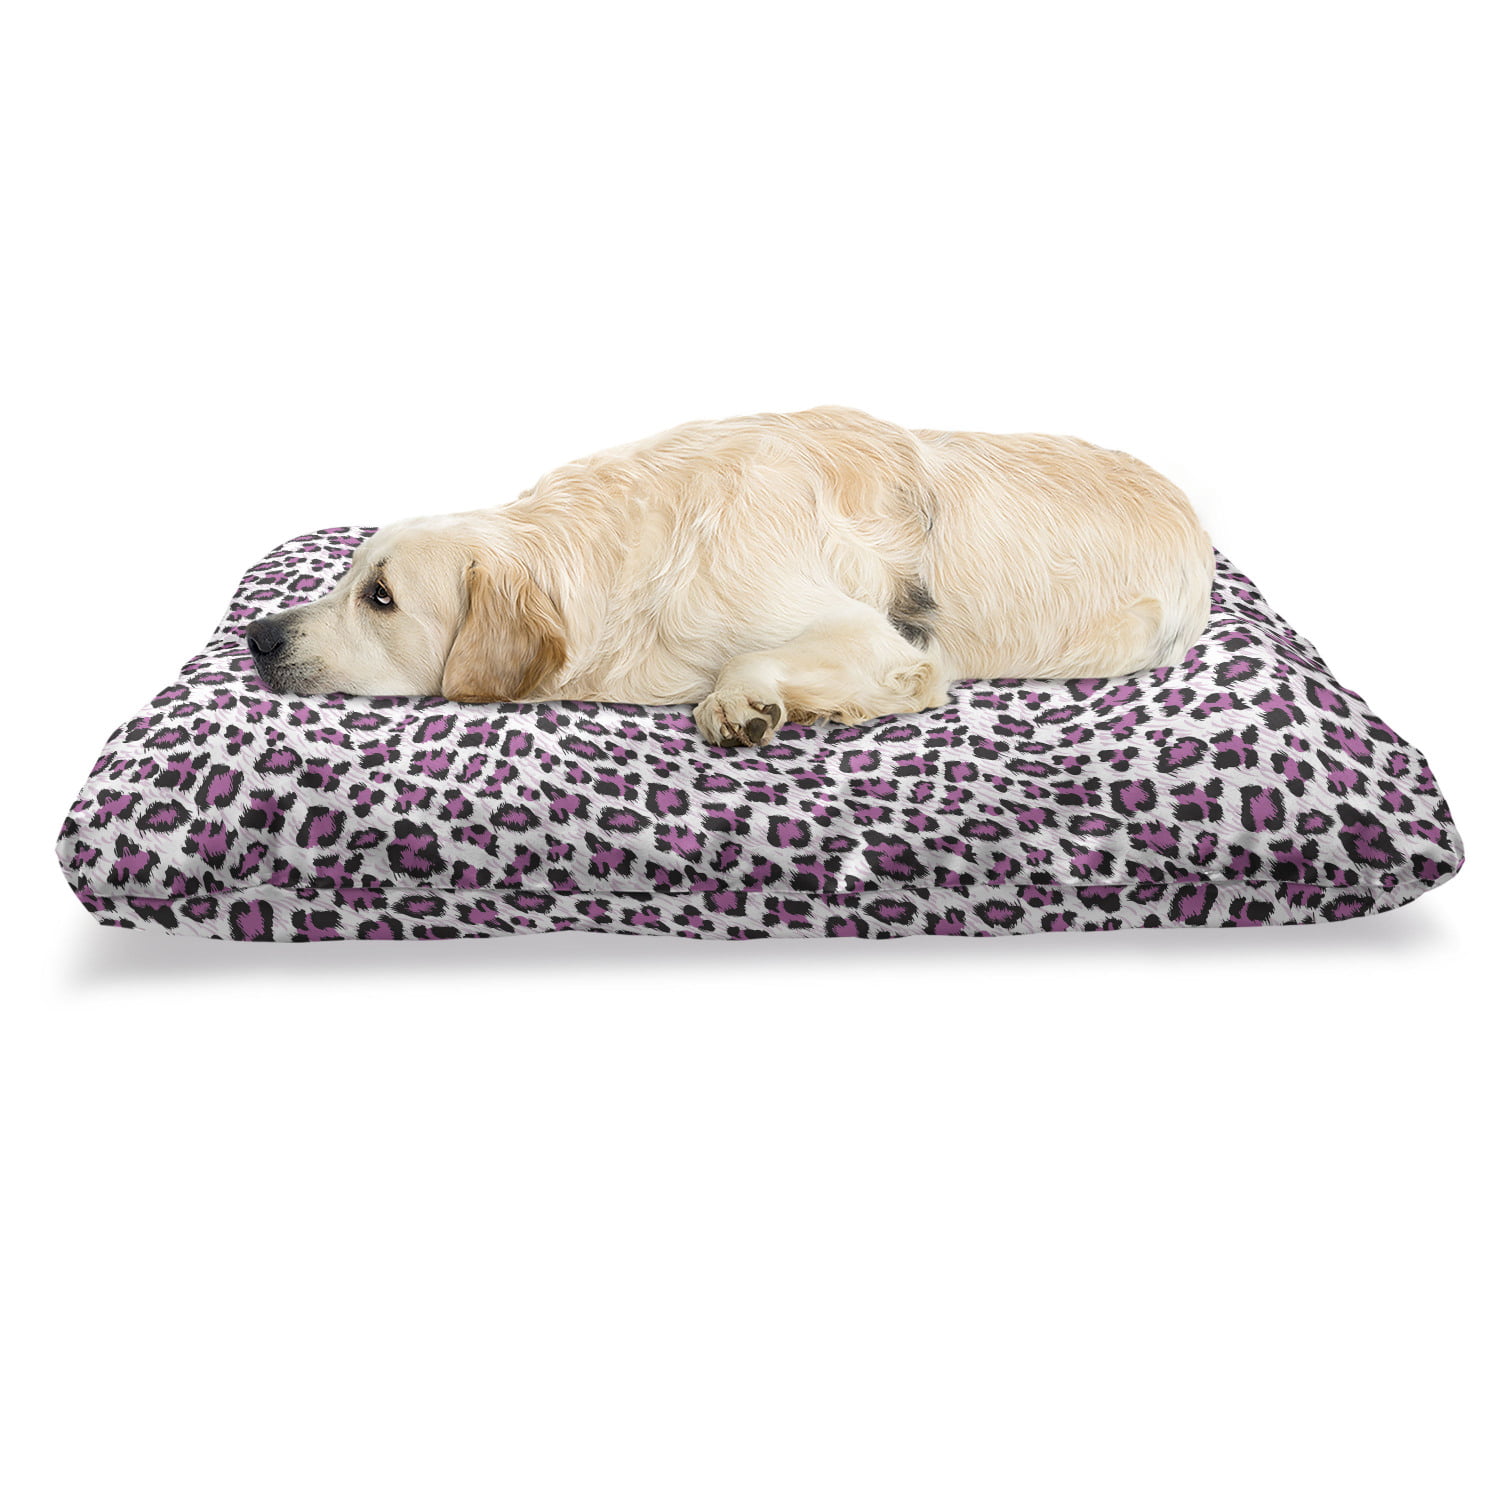 Dog bed 30 x 30 Floor Pillow Cover Leopard Faux Fur Animal Print large pillow 